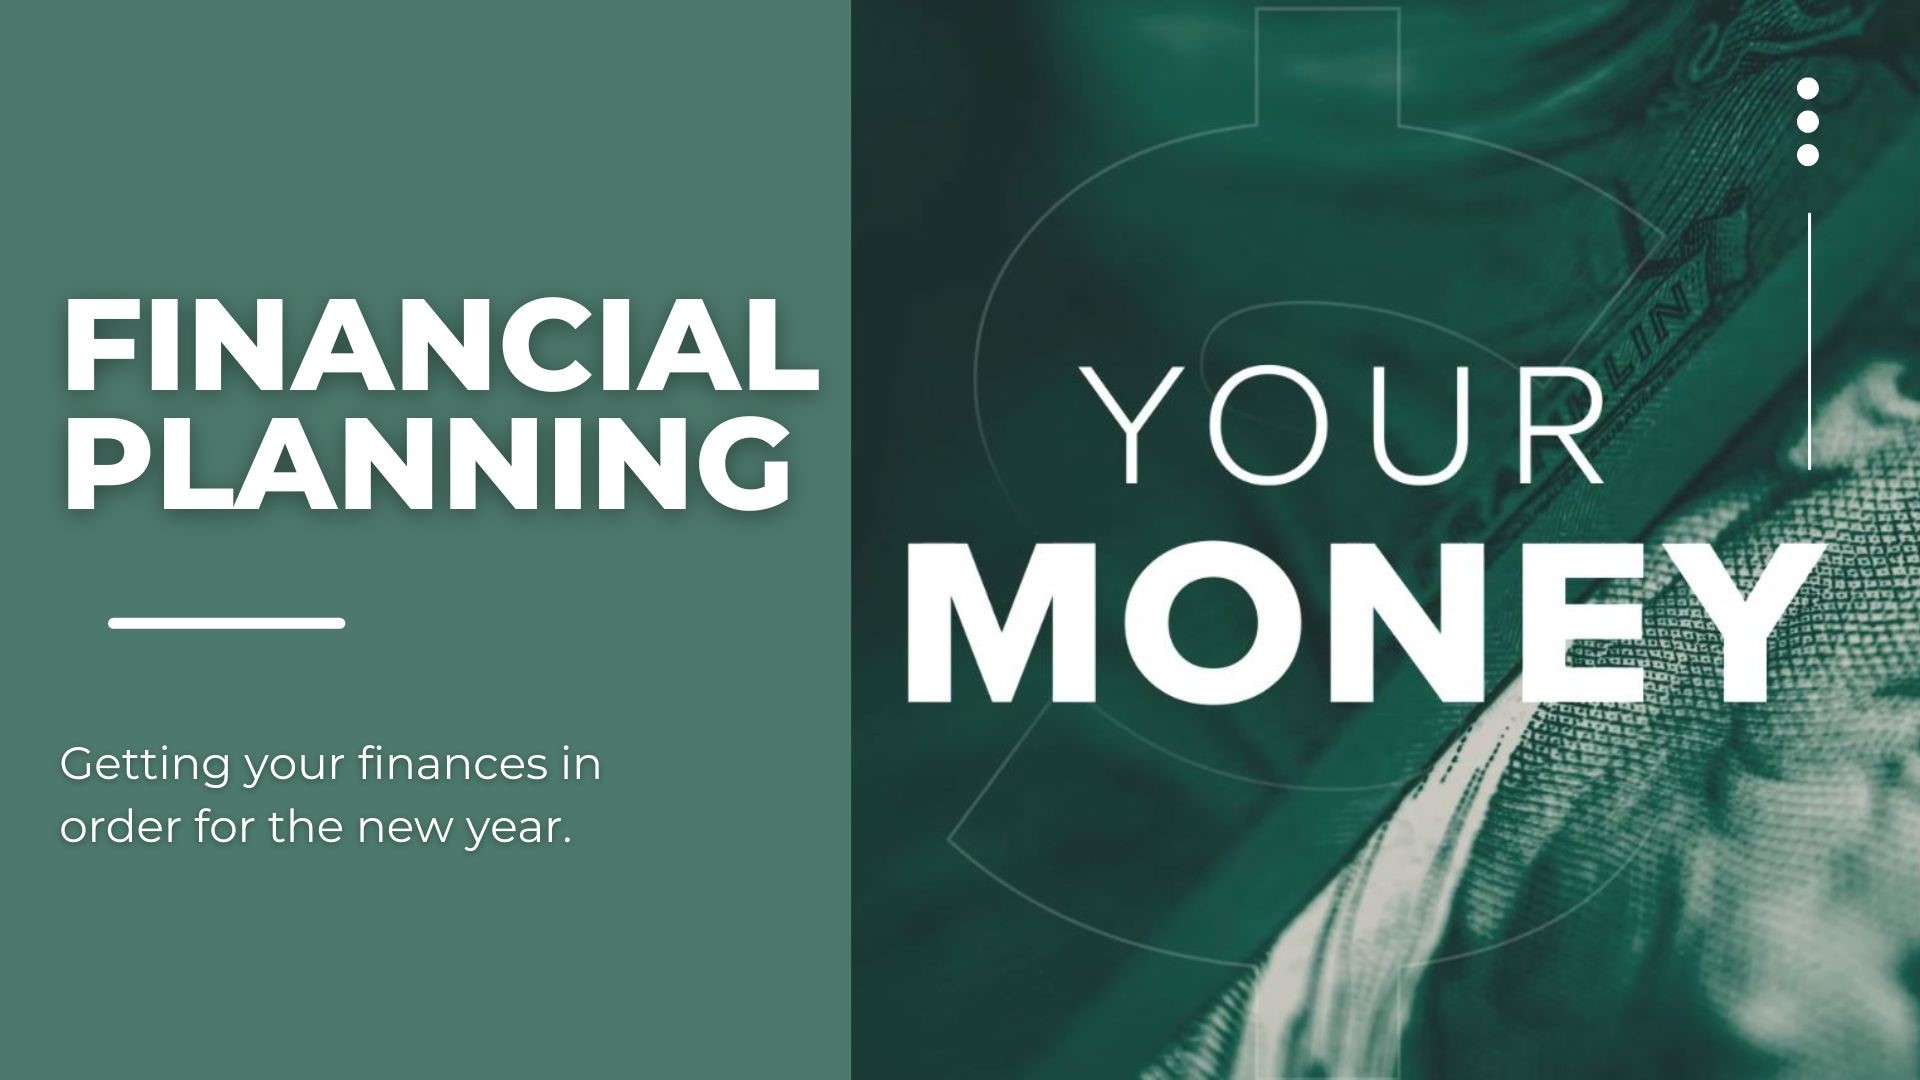 As we kick off a new year, its time to get your finances in order. How to plan for the next year, pay off your debt and avoid scams.